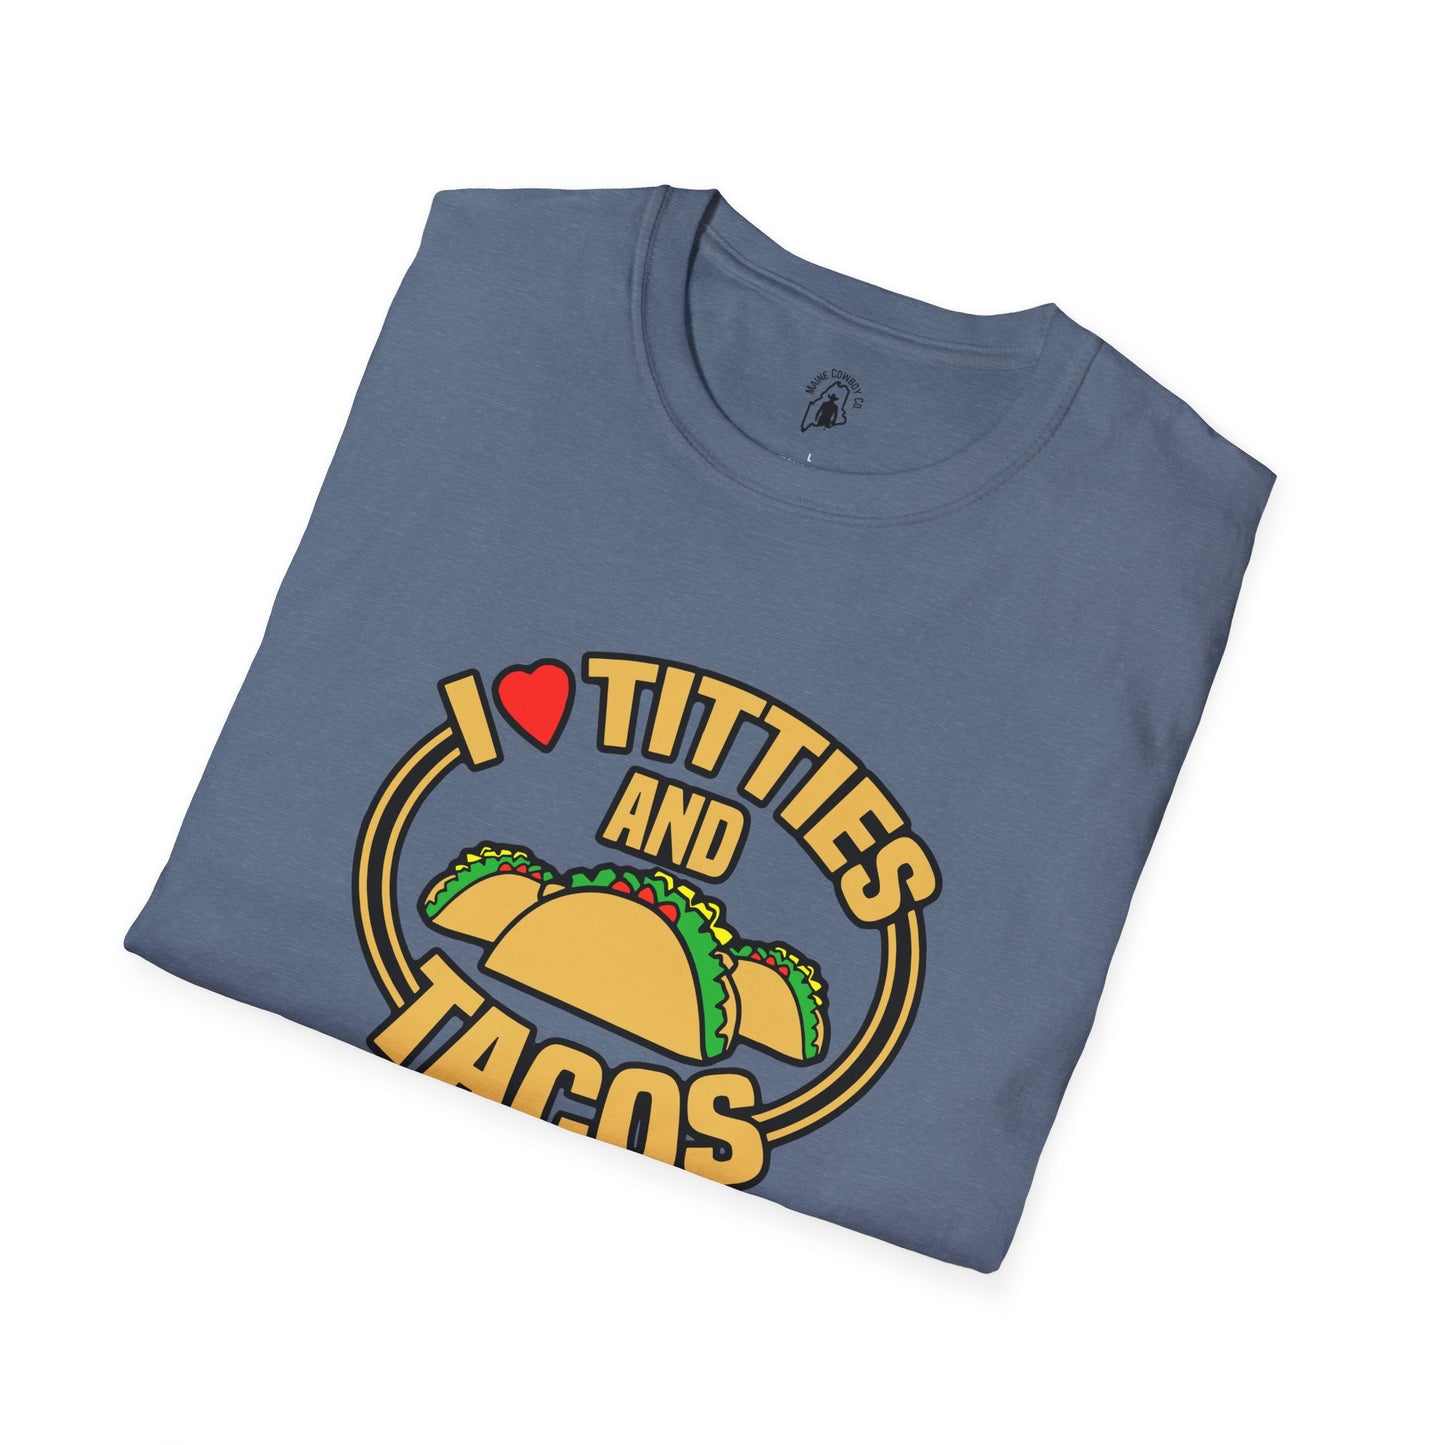 Softstyle Titties And Tacos T-Shirt